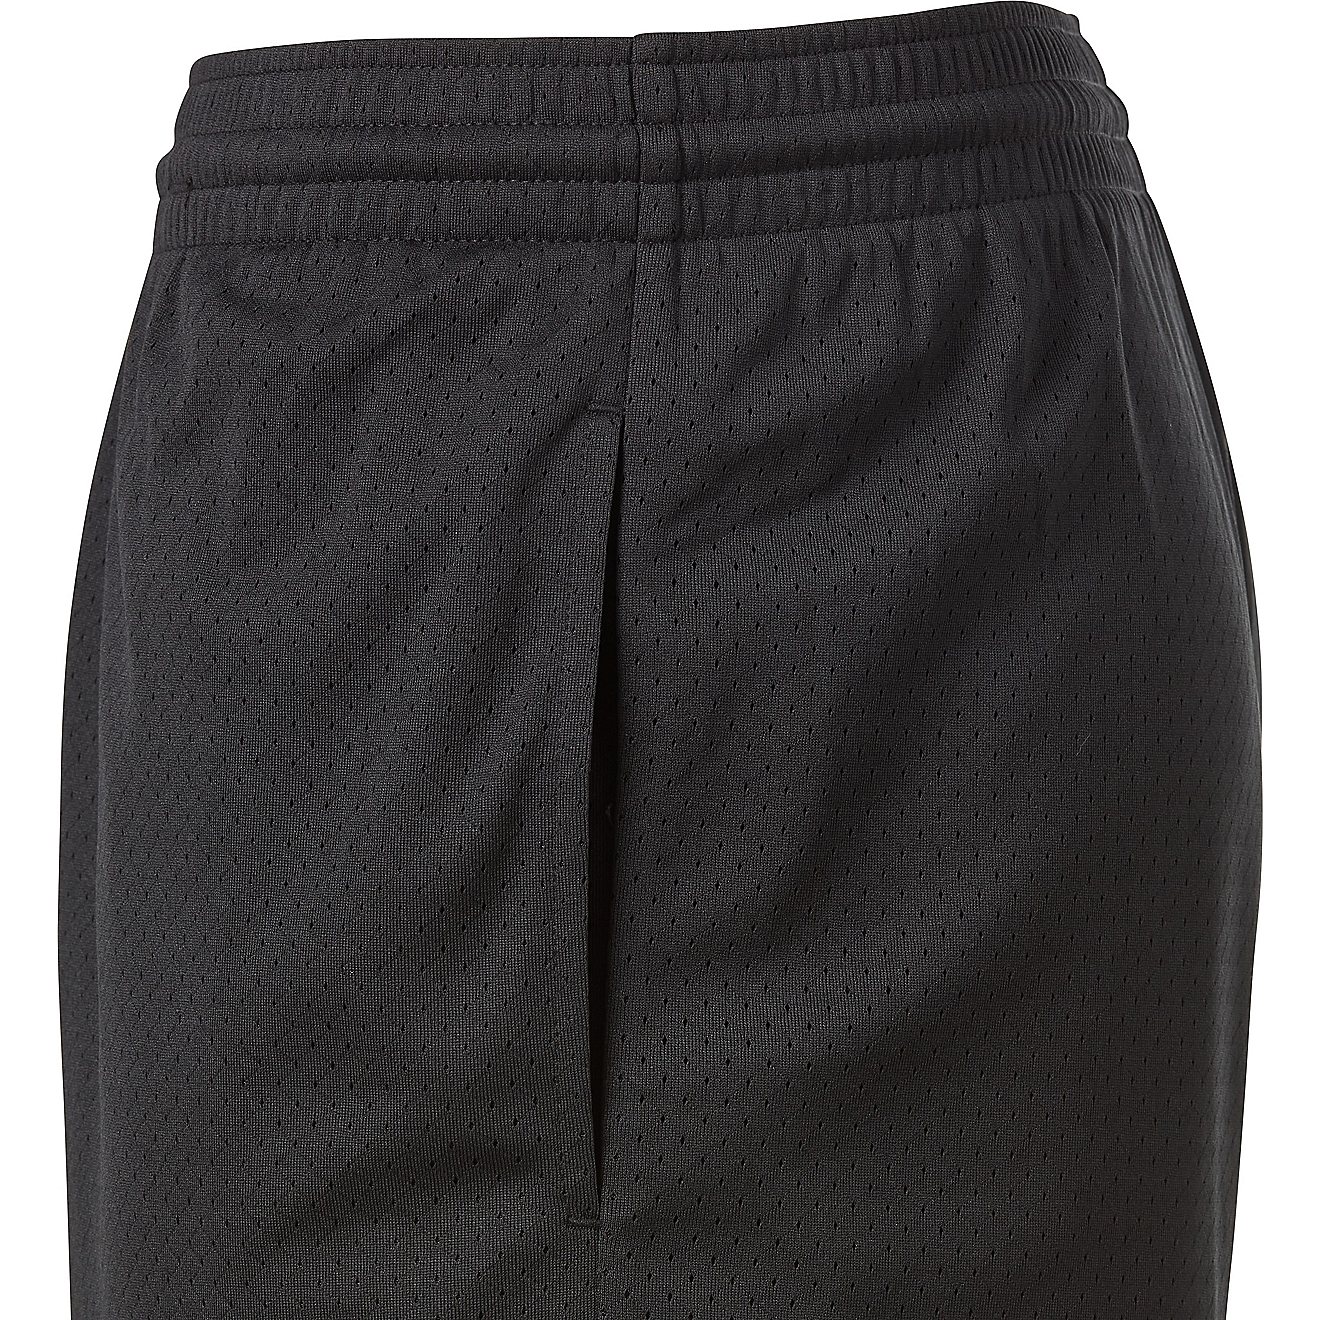 BCG Men's Diamond Mesh Basketball Shorts 9 in                                                                                    - view number 3